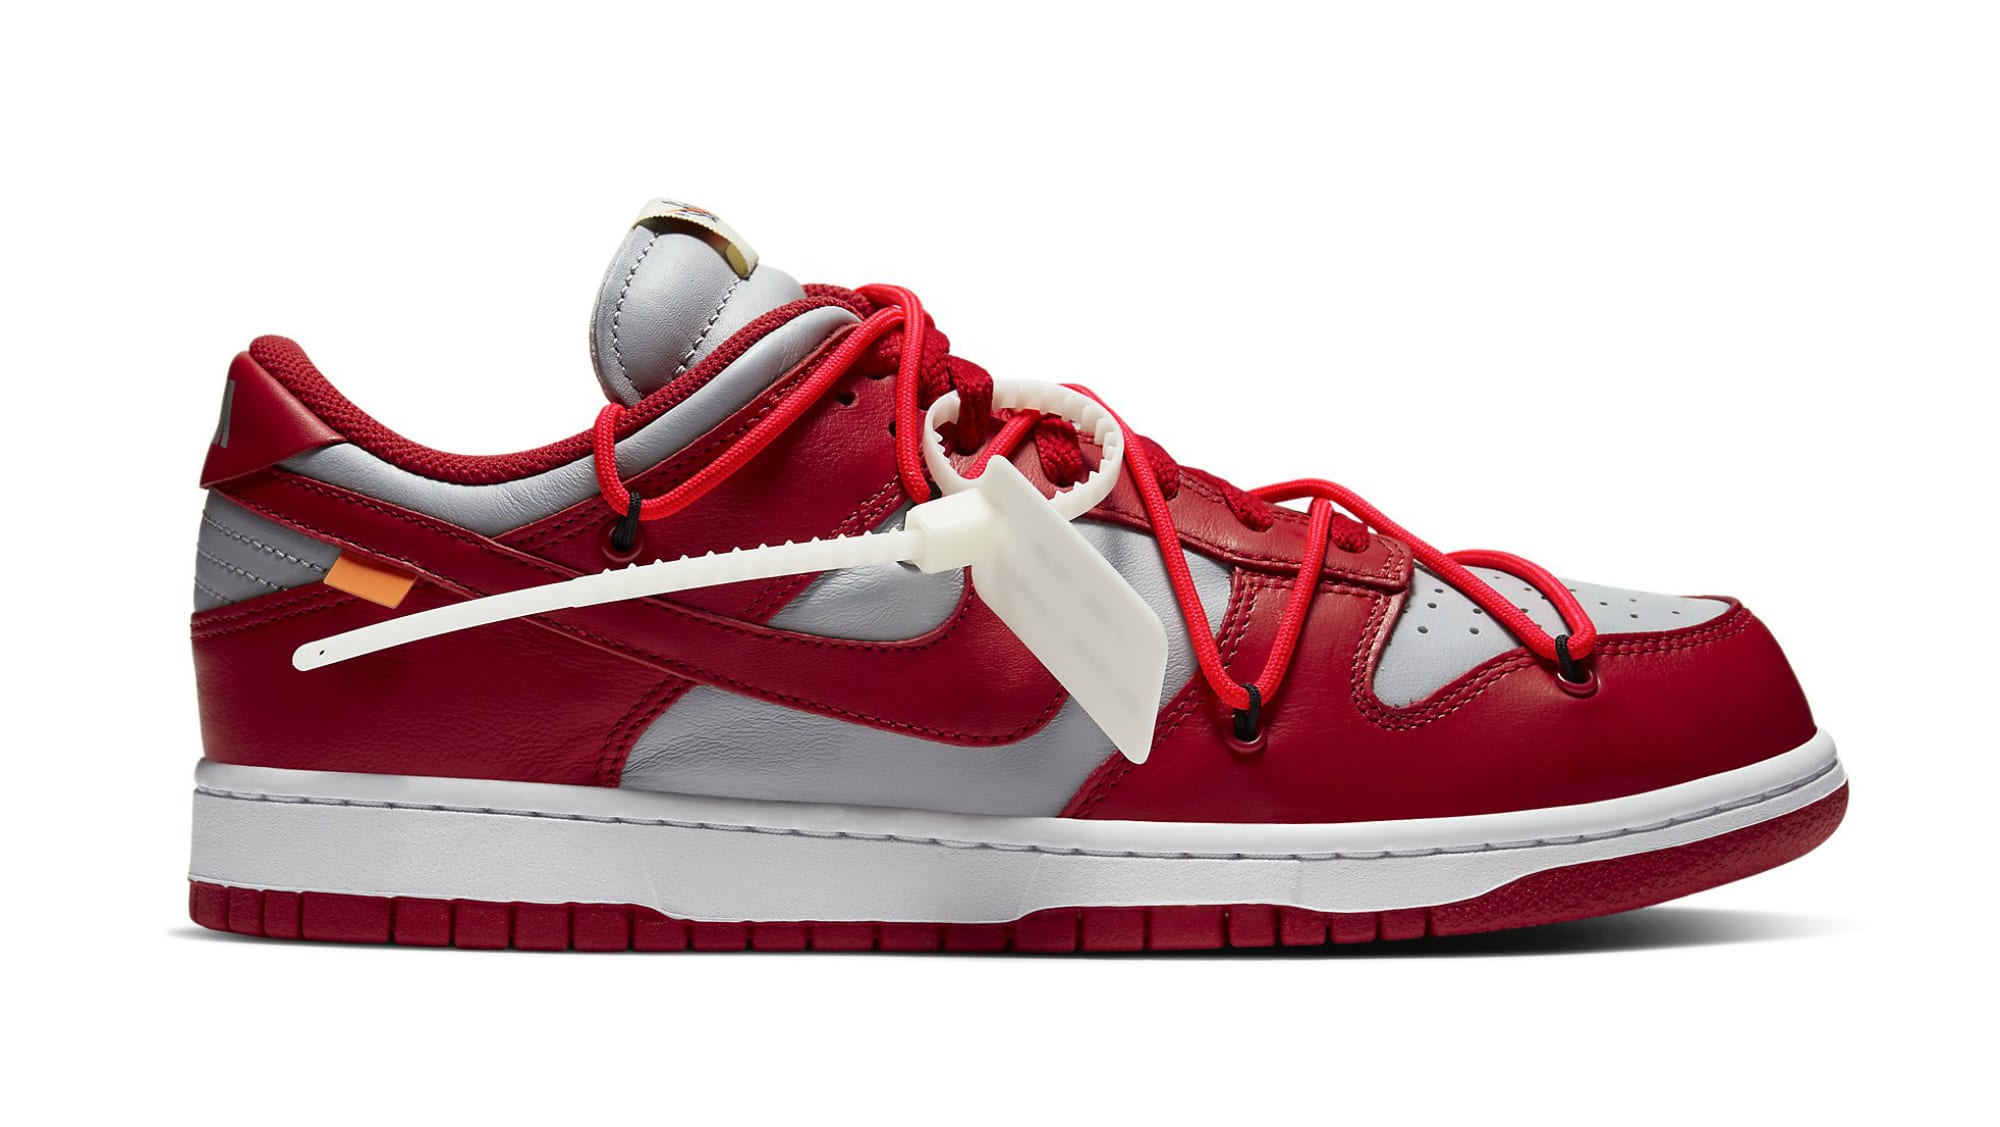 off-white-nike-dunk-low-university-red-wolf-grey-ct0856-600-release-date